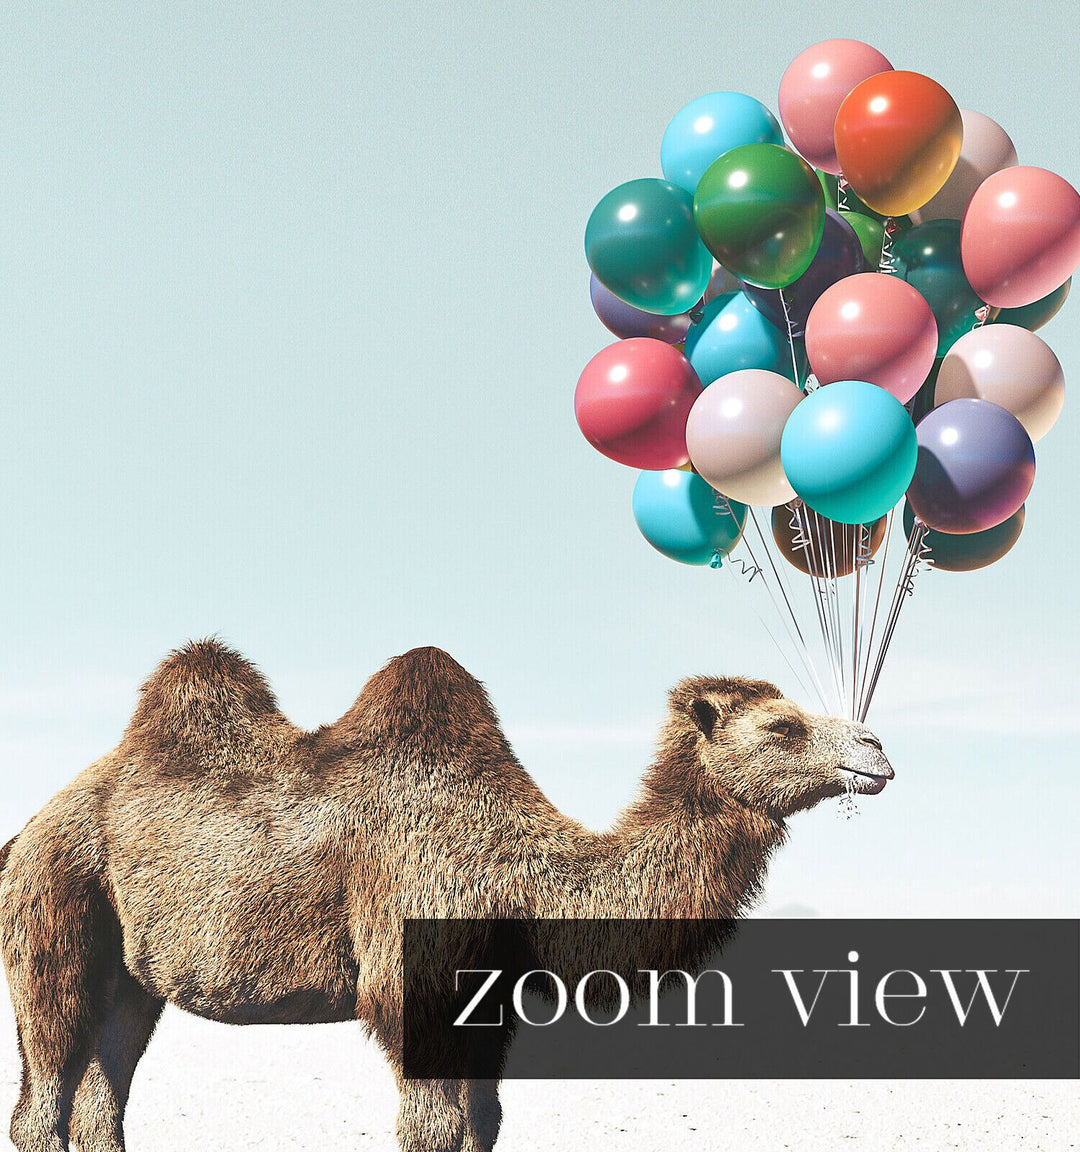 Camel with Balloons Wall Art Print